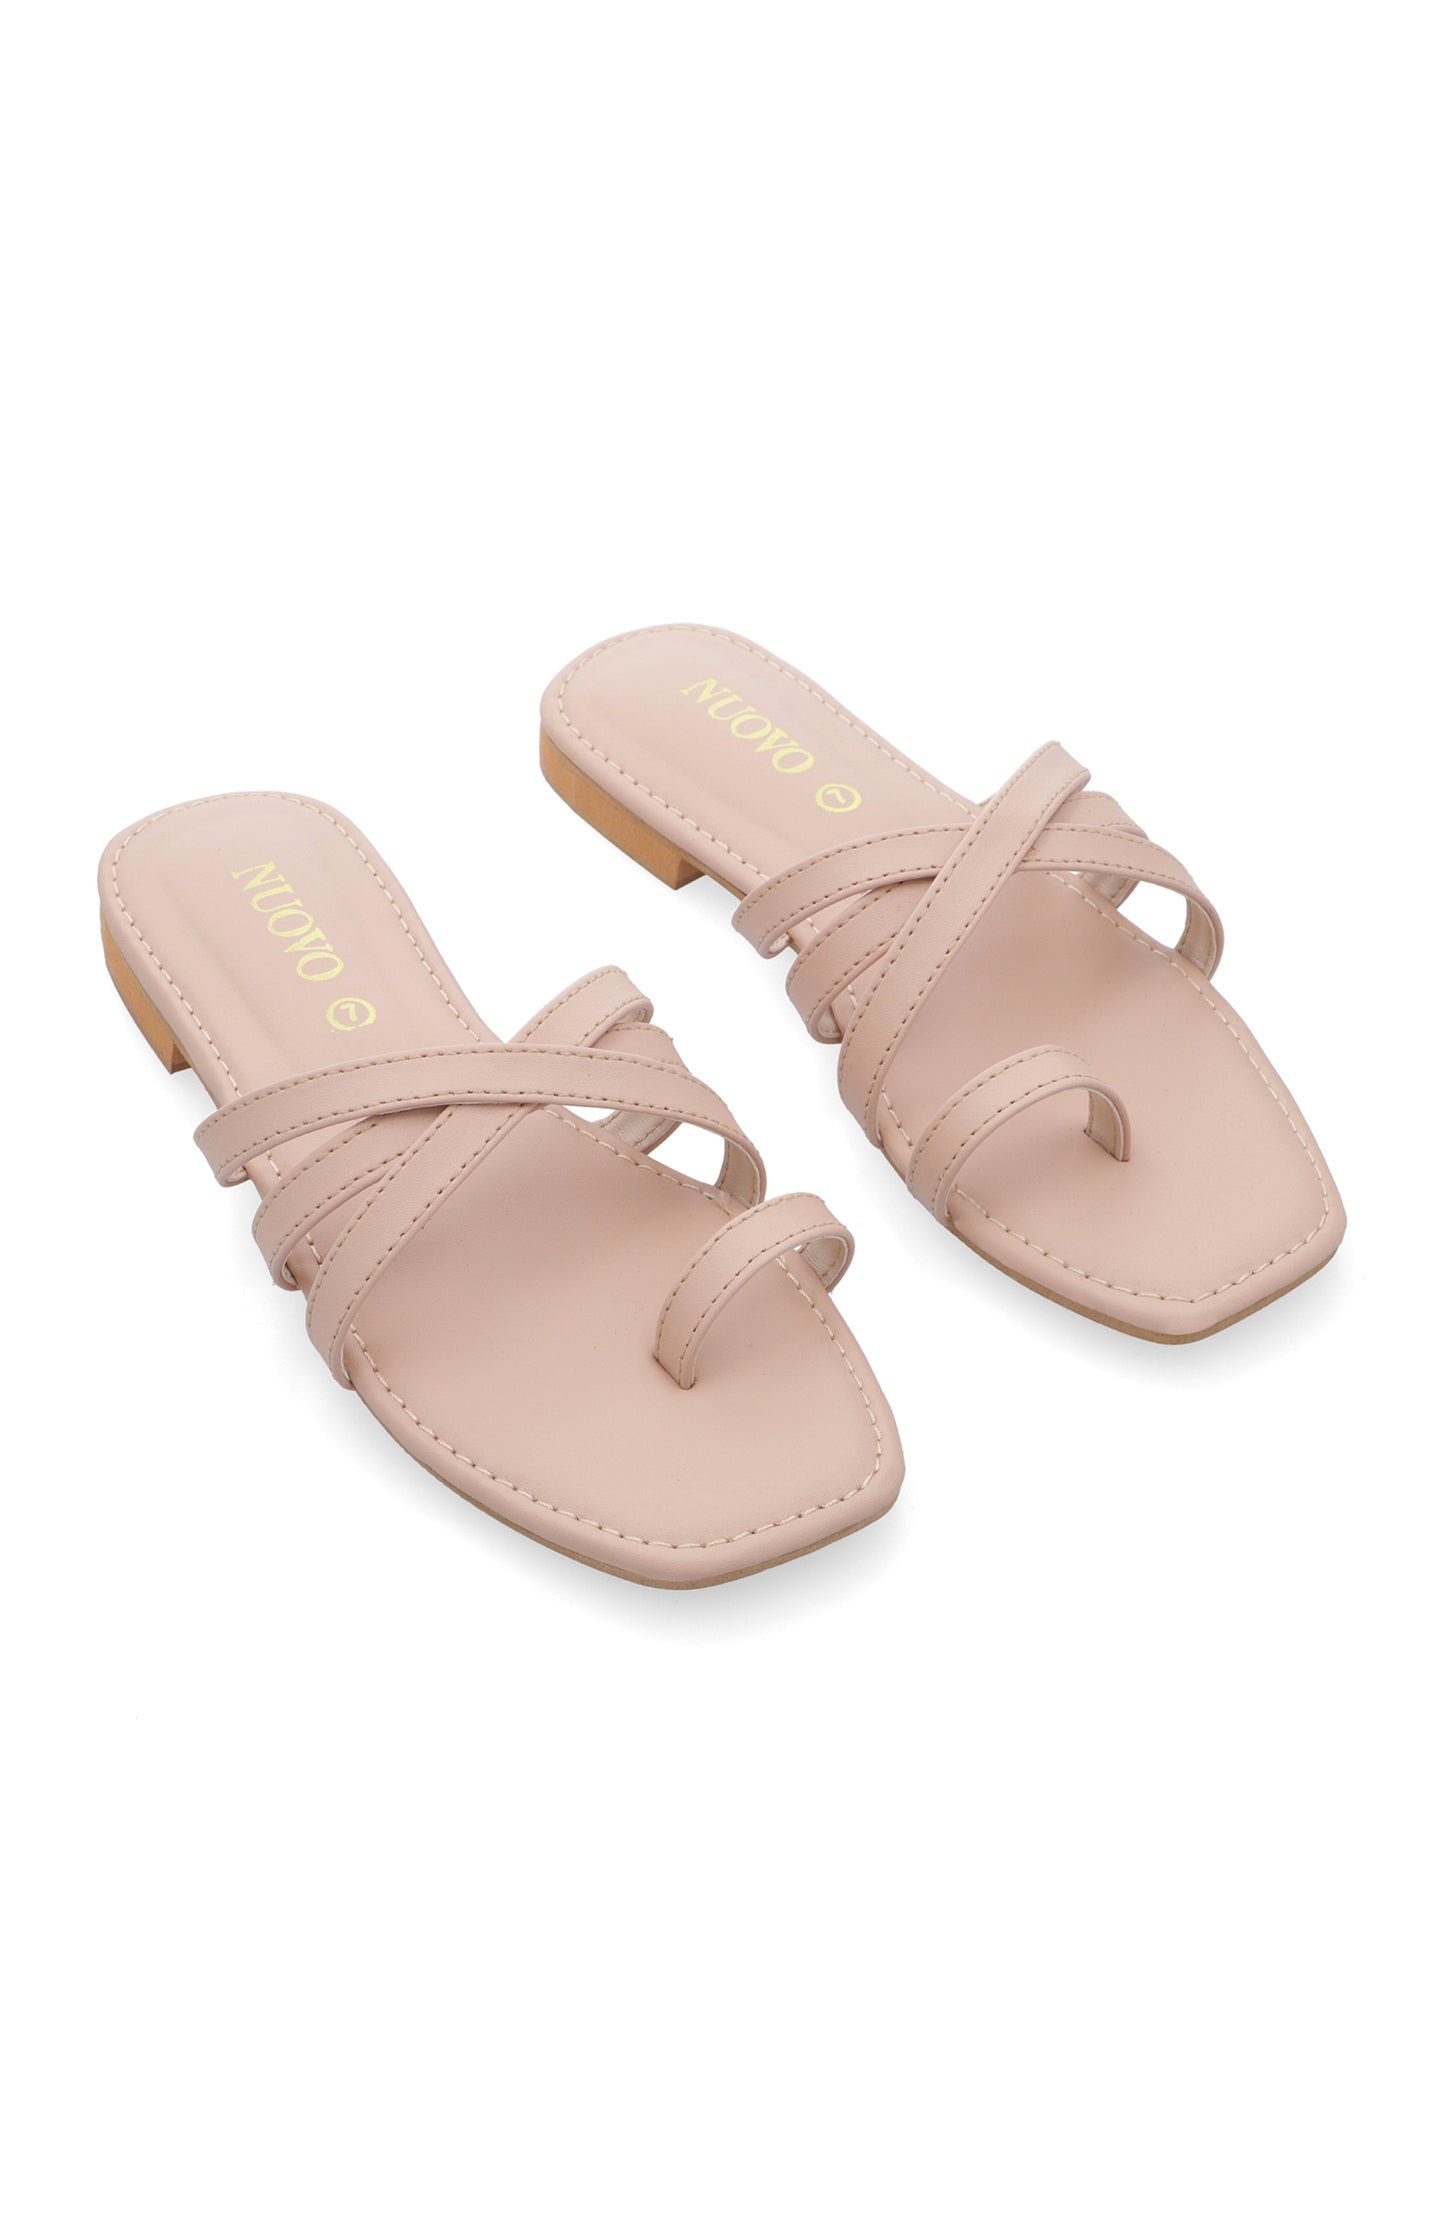 Women Slippers -  FAWN (ORFS-85 FAWN)